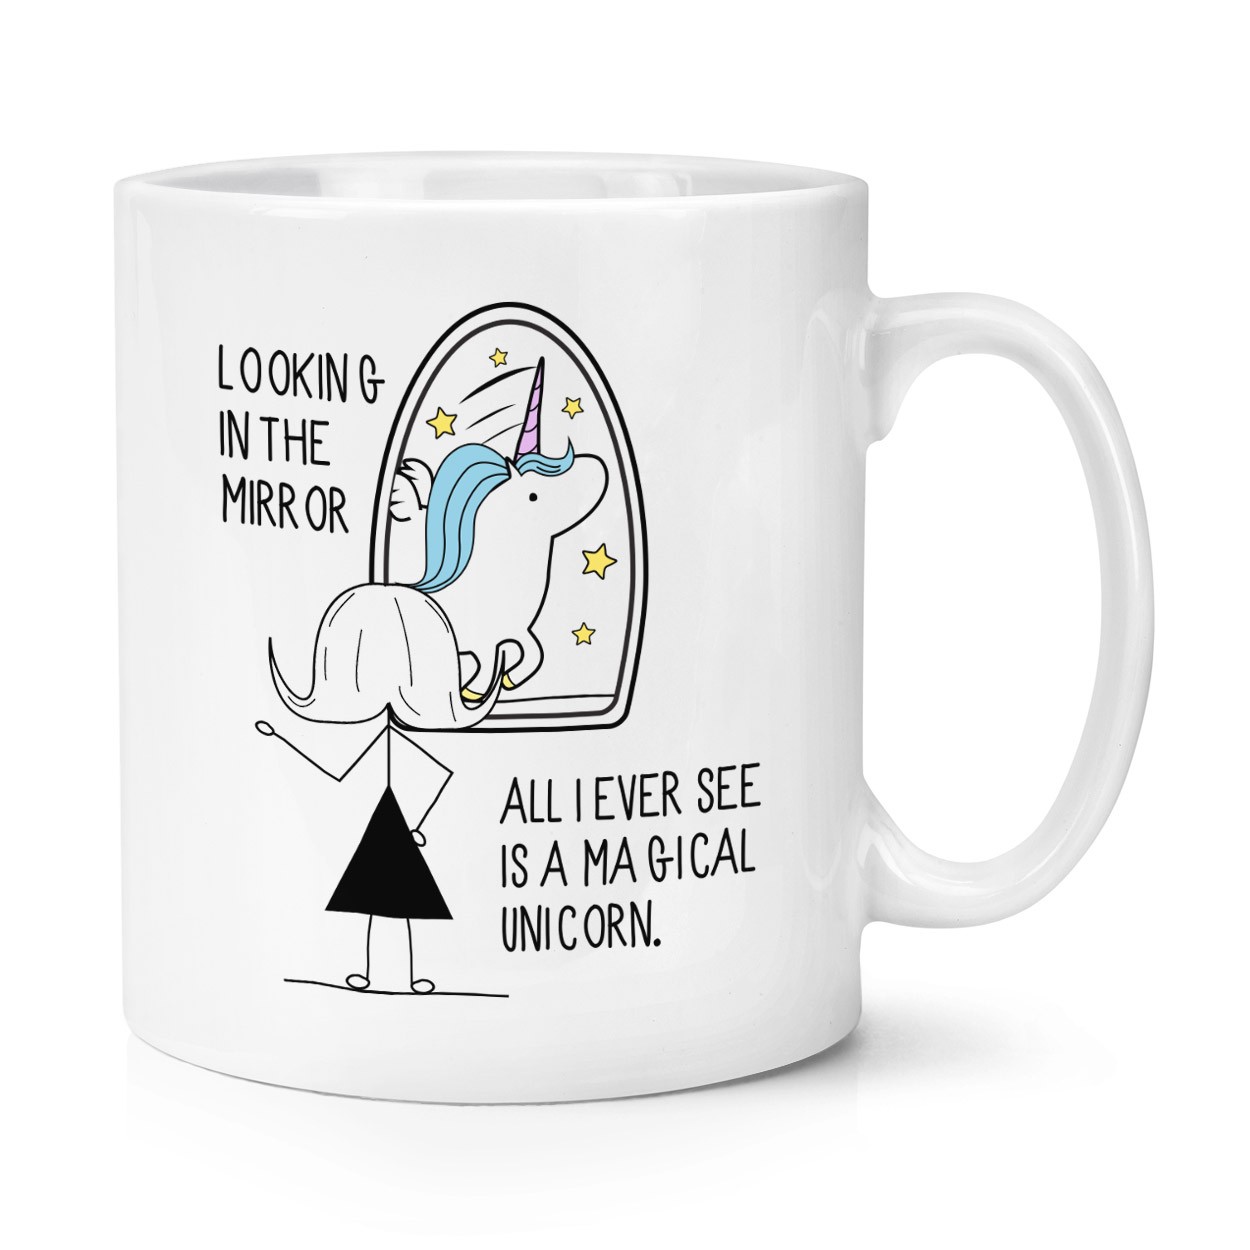 Looking In The Mirror I See A Magical Unicorn 10oz Mug Cup